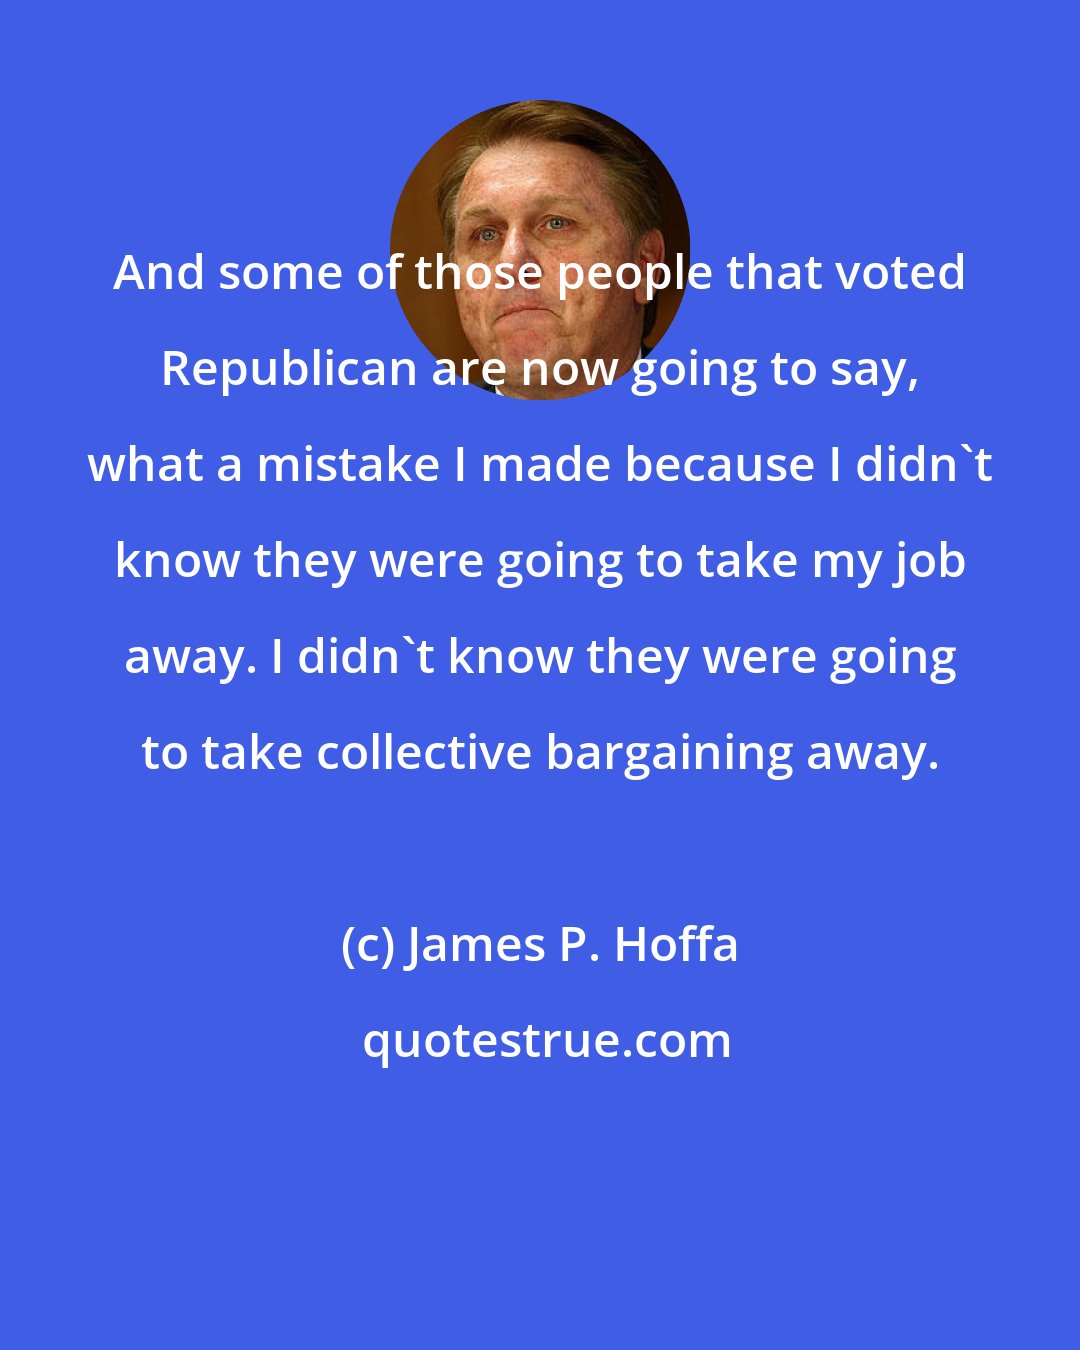 James P. Hoffa: And some of those people that voted Republican are now going to say, what a mistake I made because I didn't know they were going to take my job away. I didn't know they were going to take collective bargaining away.